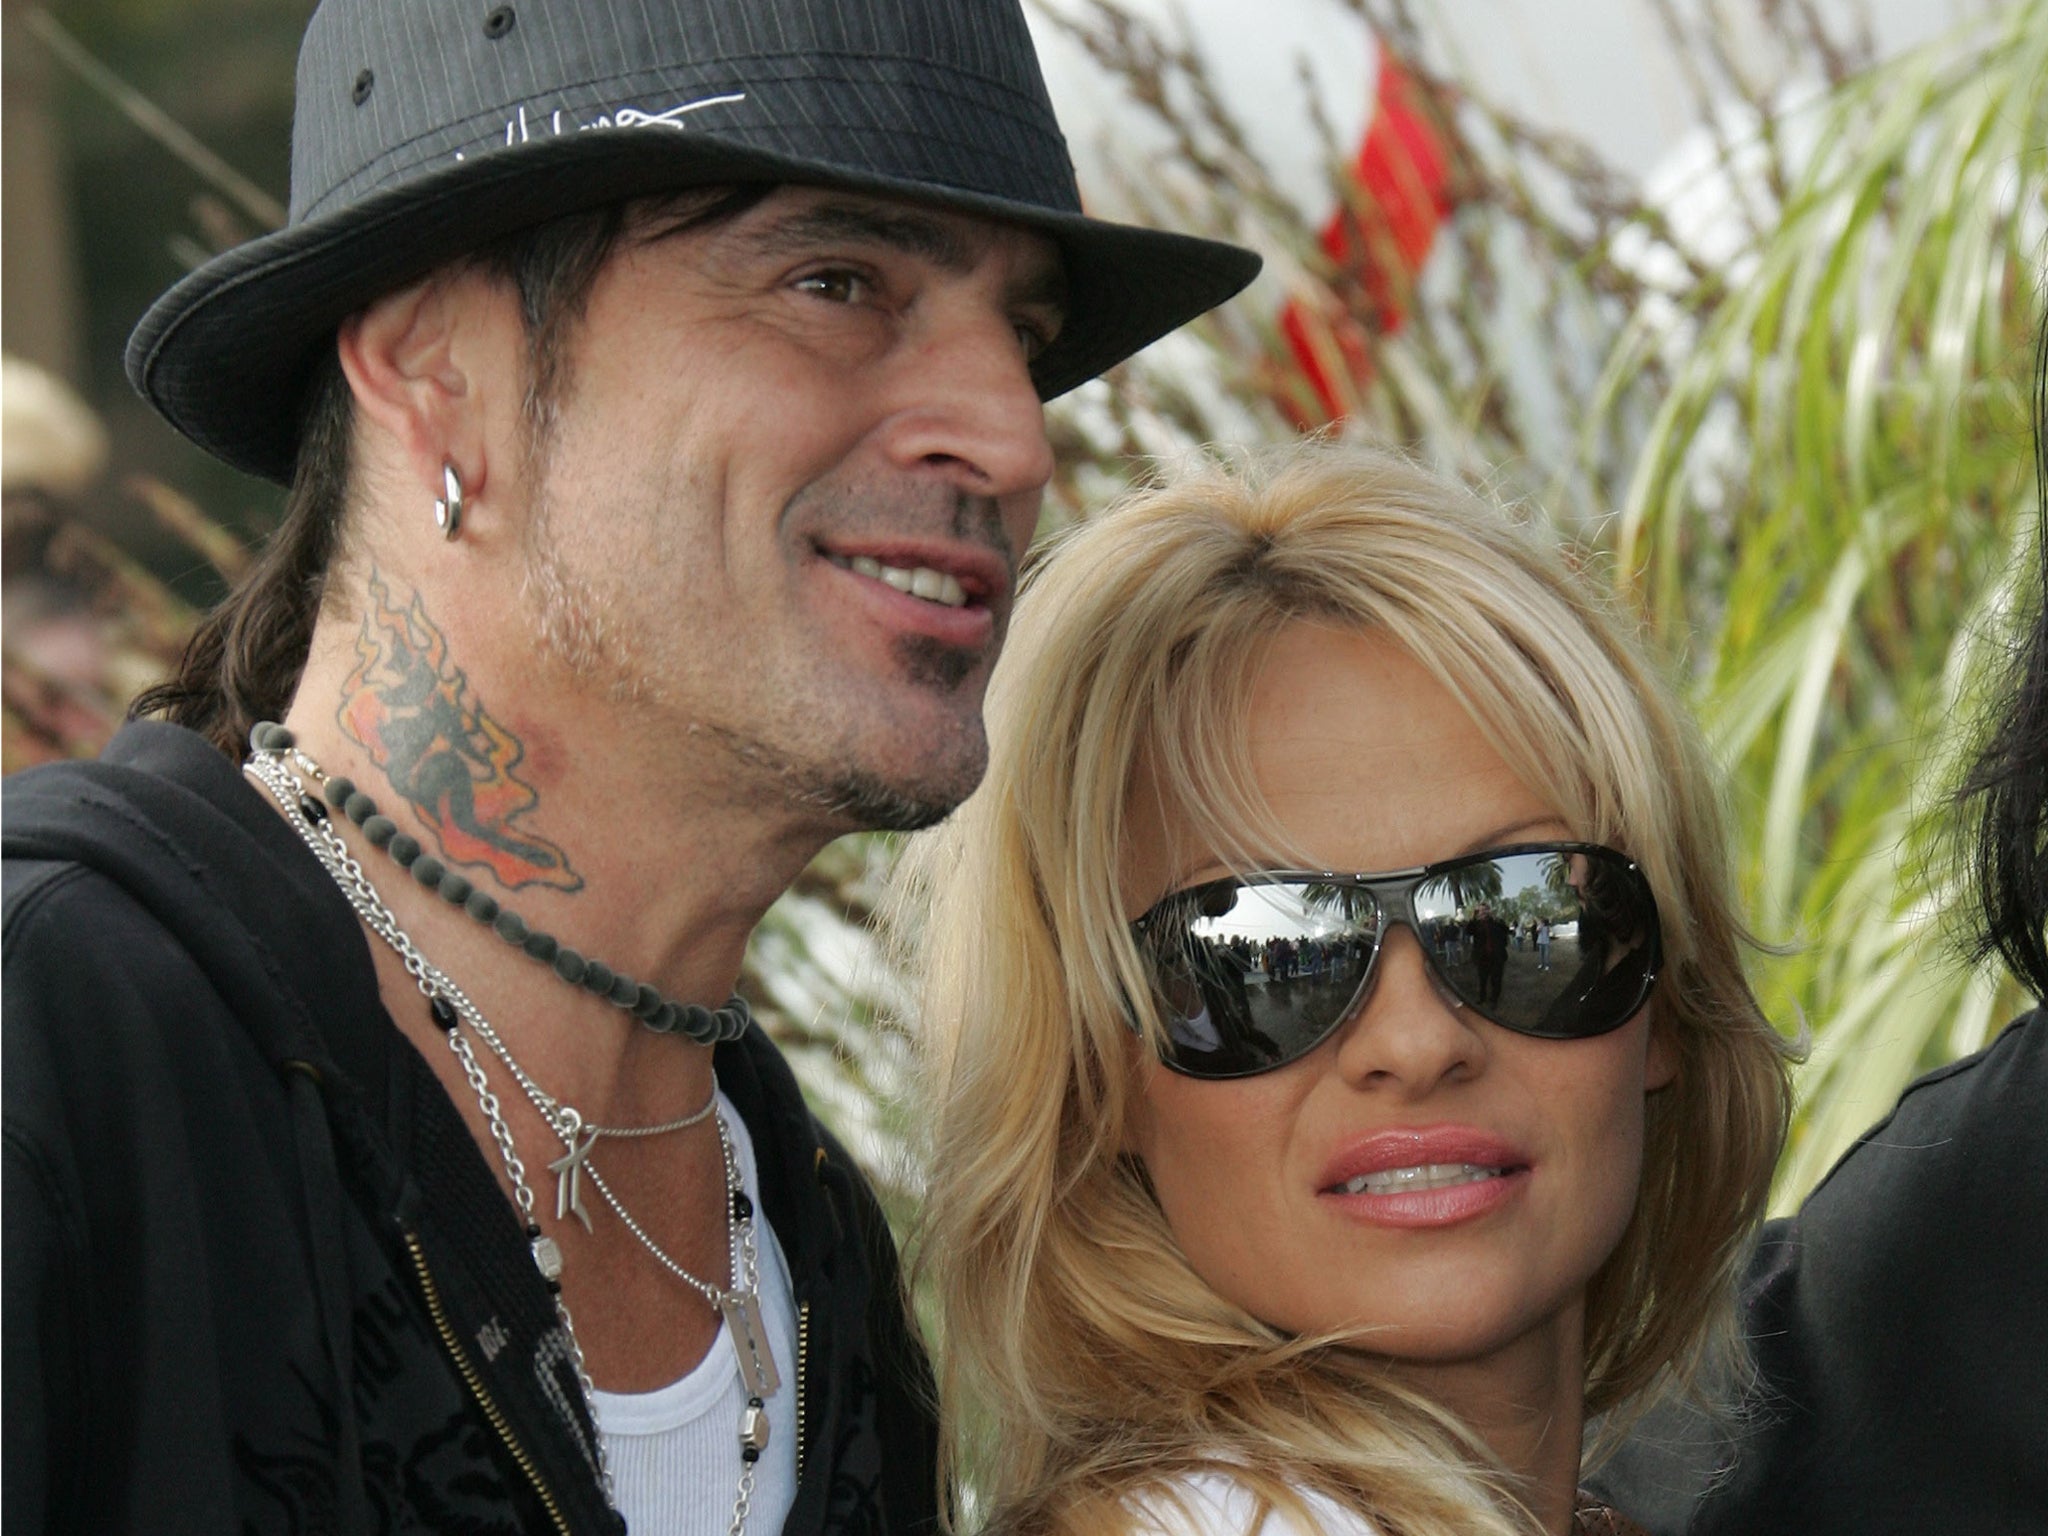 Anderson was married to Mötley Crüe musician Tommy Lee from 1995 to 1998